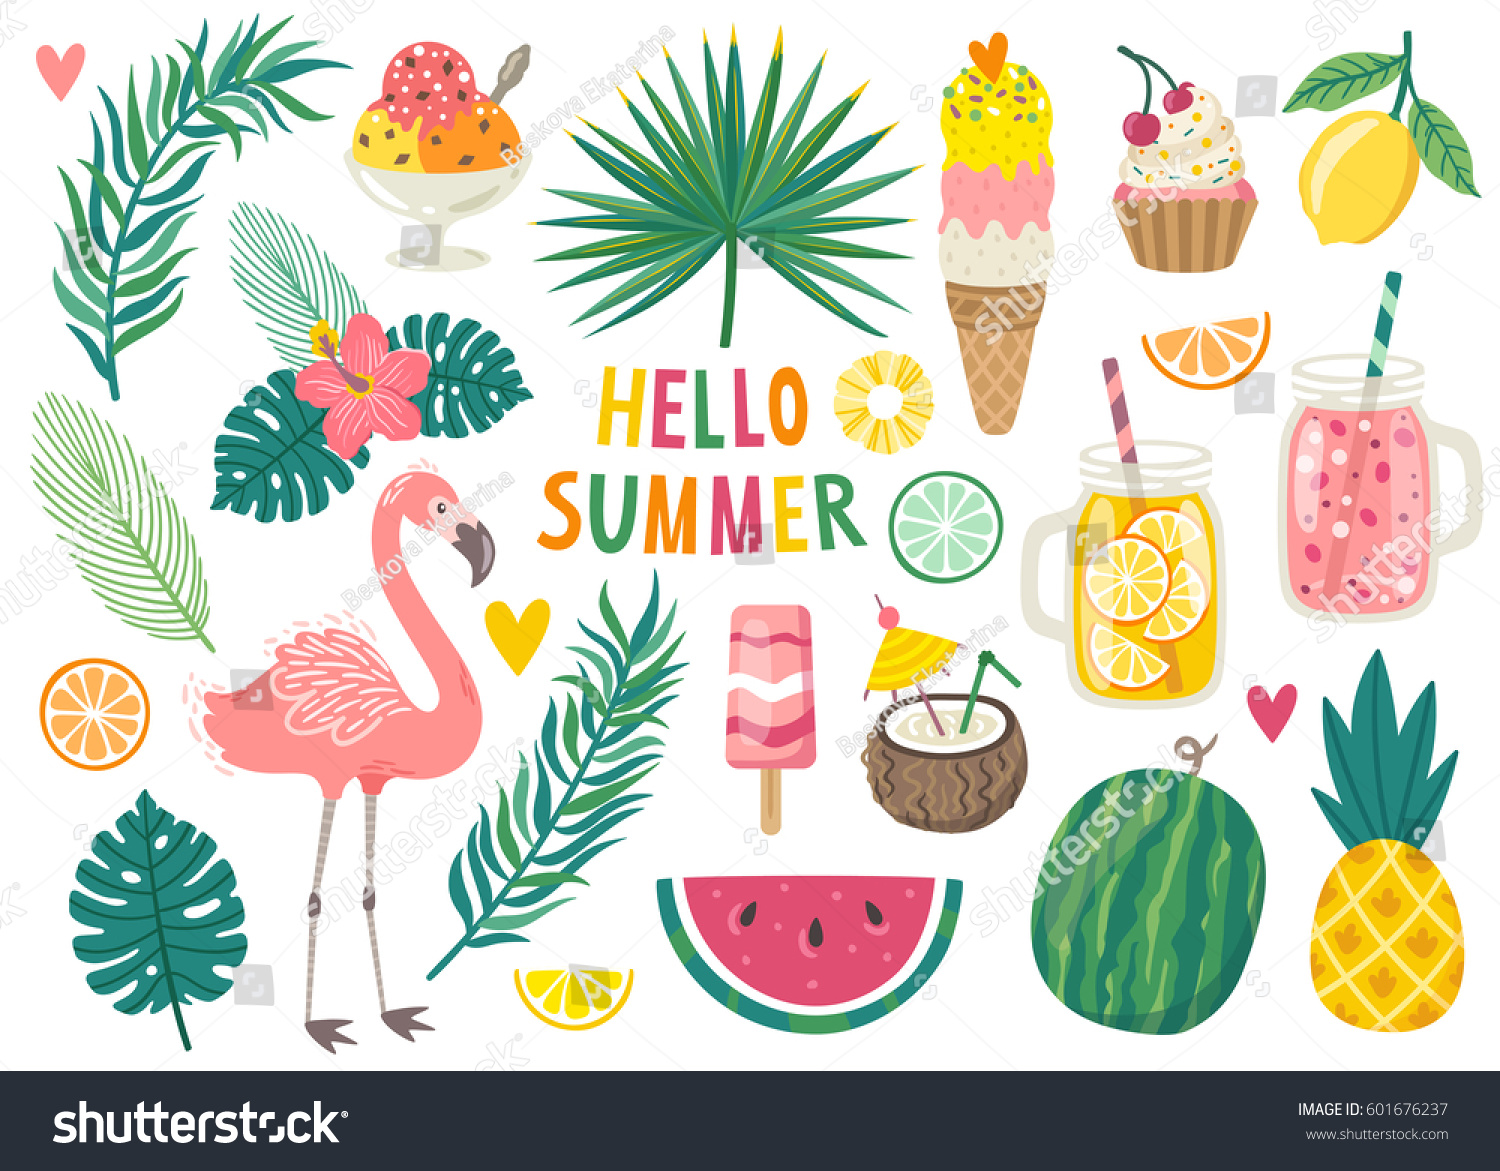 SVG of Set of cute summer icons: food, drinks, palm leaves, fruits and flamingo. Bright summertime poster. Collection of scrapbooking elements for beach party. svg